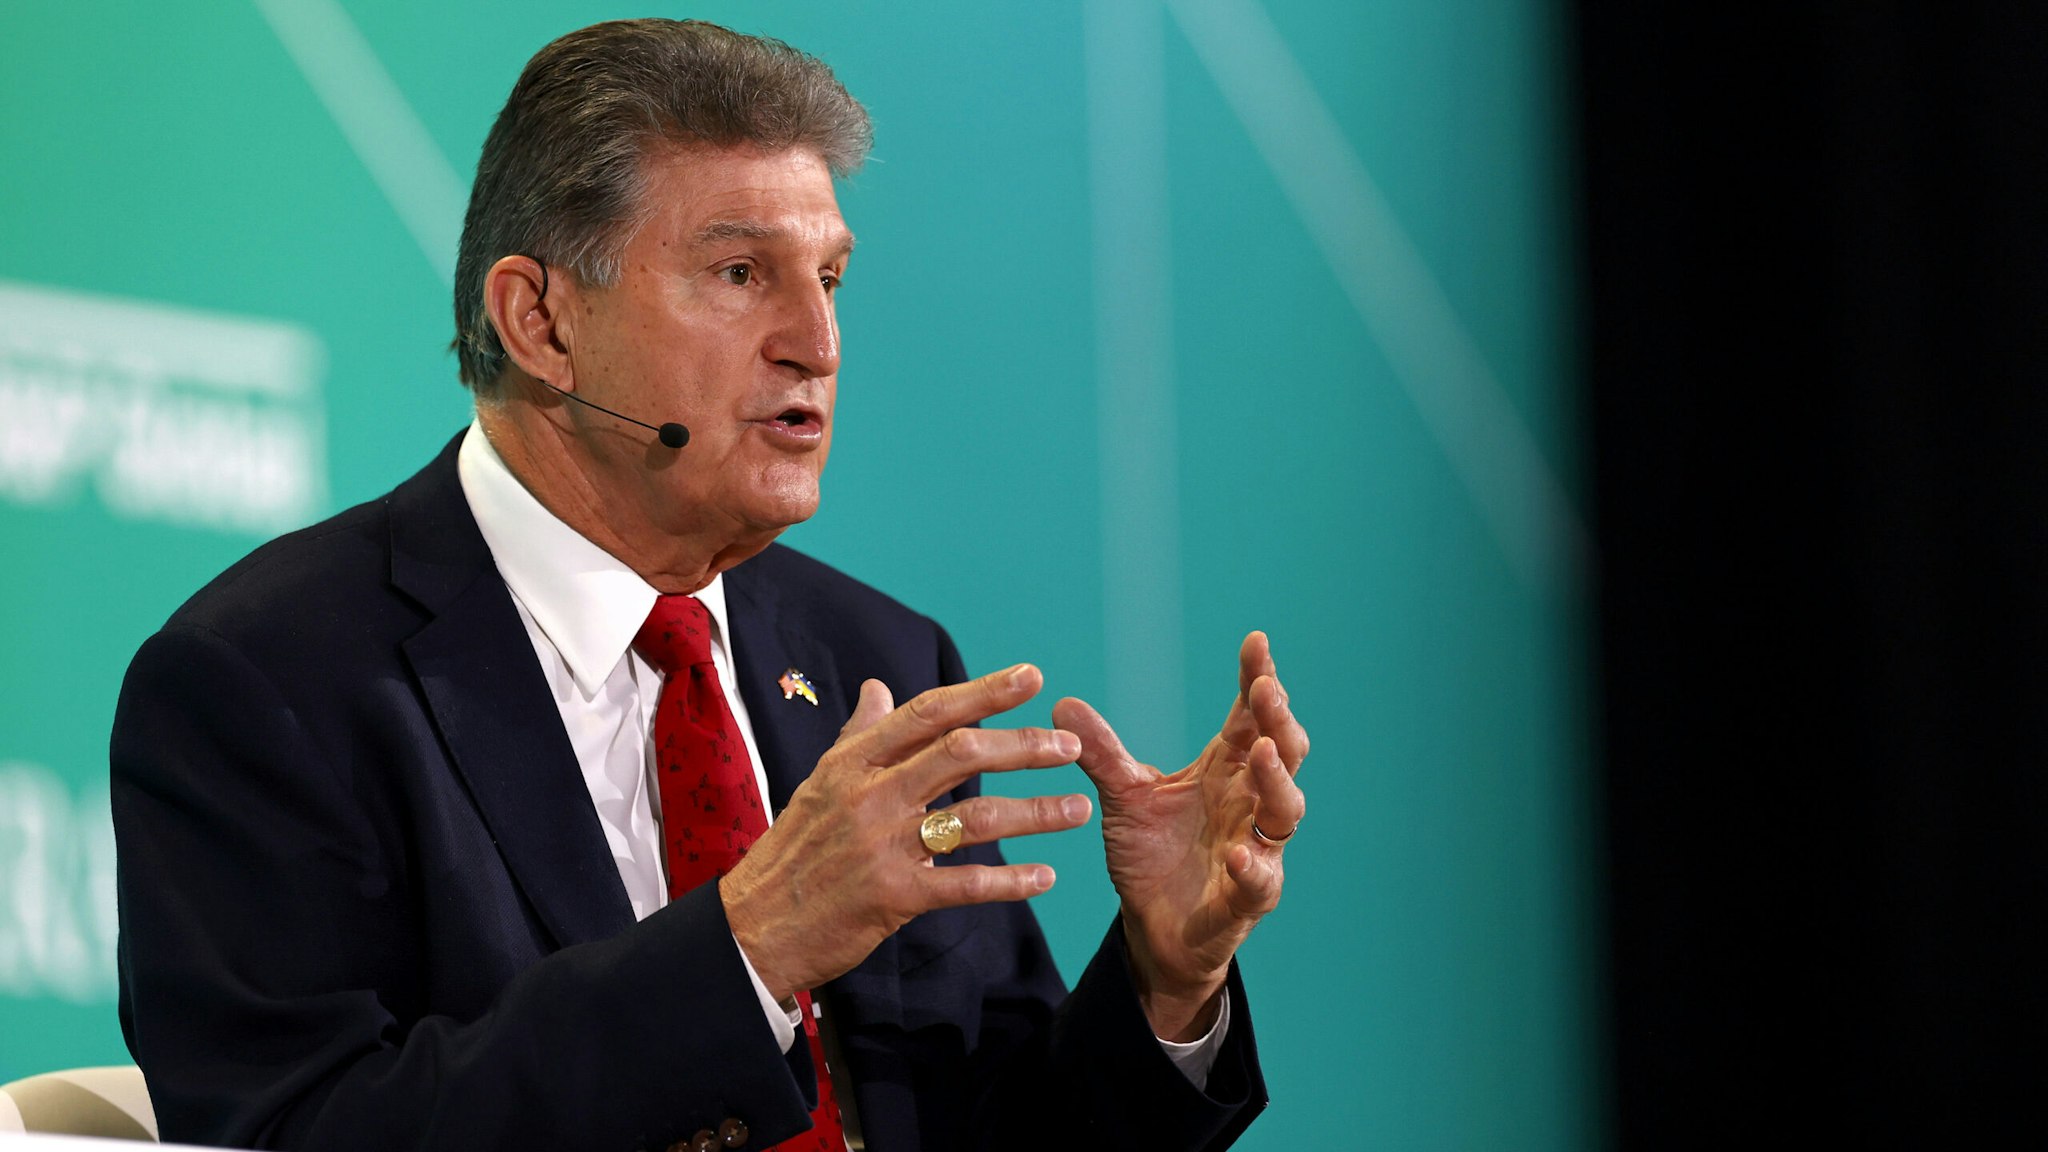 Senator Joe Manchin, a Democrat from West Virginia, speak during the 2023 CERAWeek by S&amp;P Global conference in Houston, Texas, US, on Friday, March 10, 2023. The global energy industry is facing a welter of uncertainty and change -- driven by the effects of the global pandemic; shifting geopolitics and a war launched by one of the world's major energy powers; high energy prices; supply chain and infrastructure constraints; and economic instability.